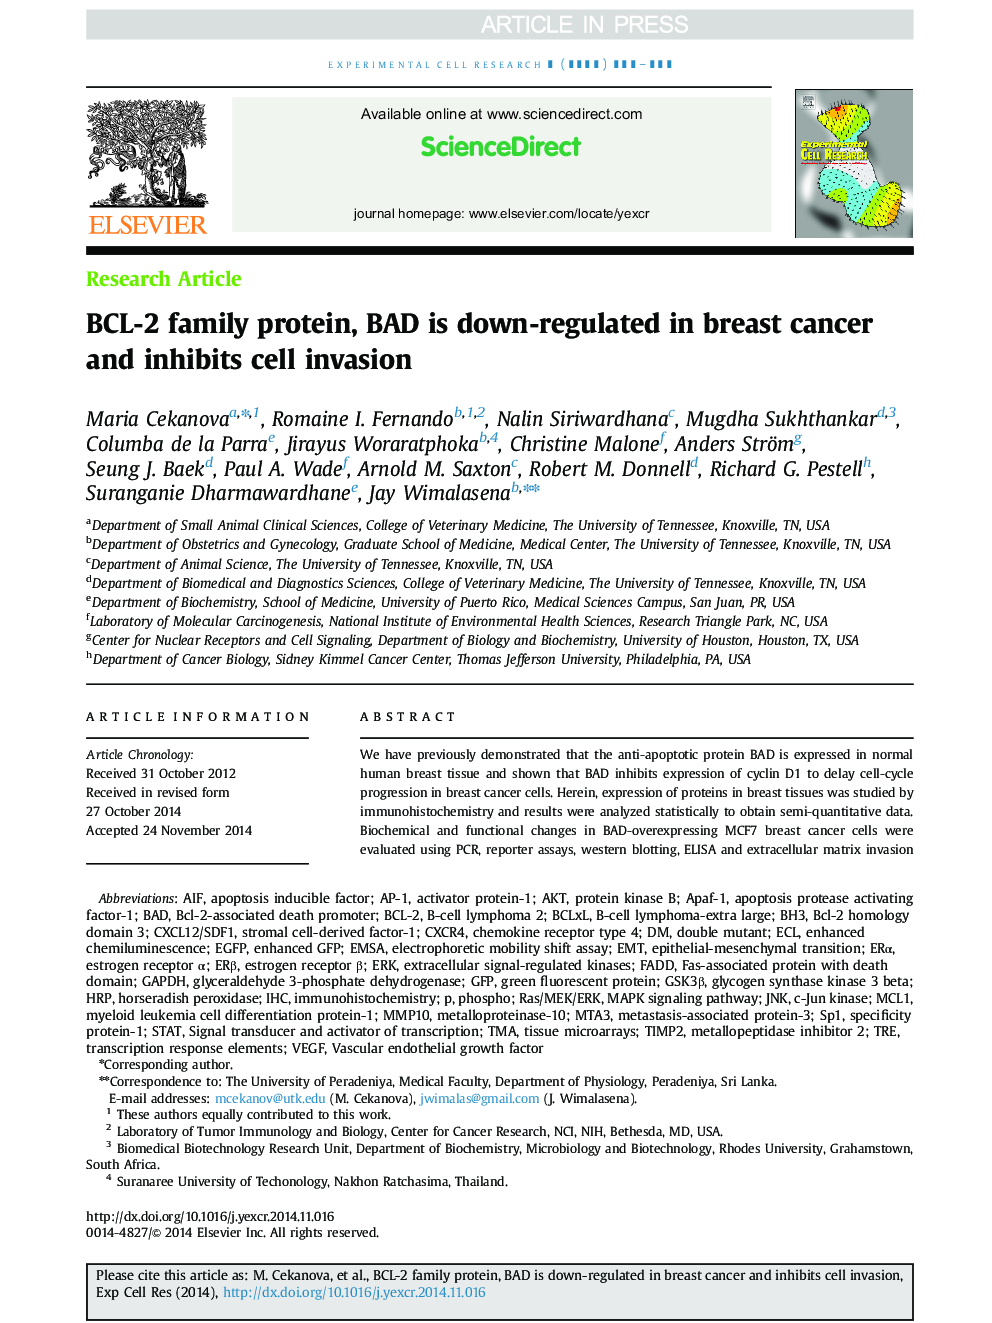 BCL-2 family protein, BAD is down-regulated in breast cancer and inhibits cell invasion